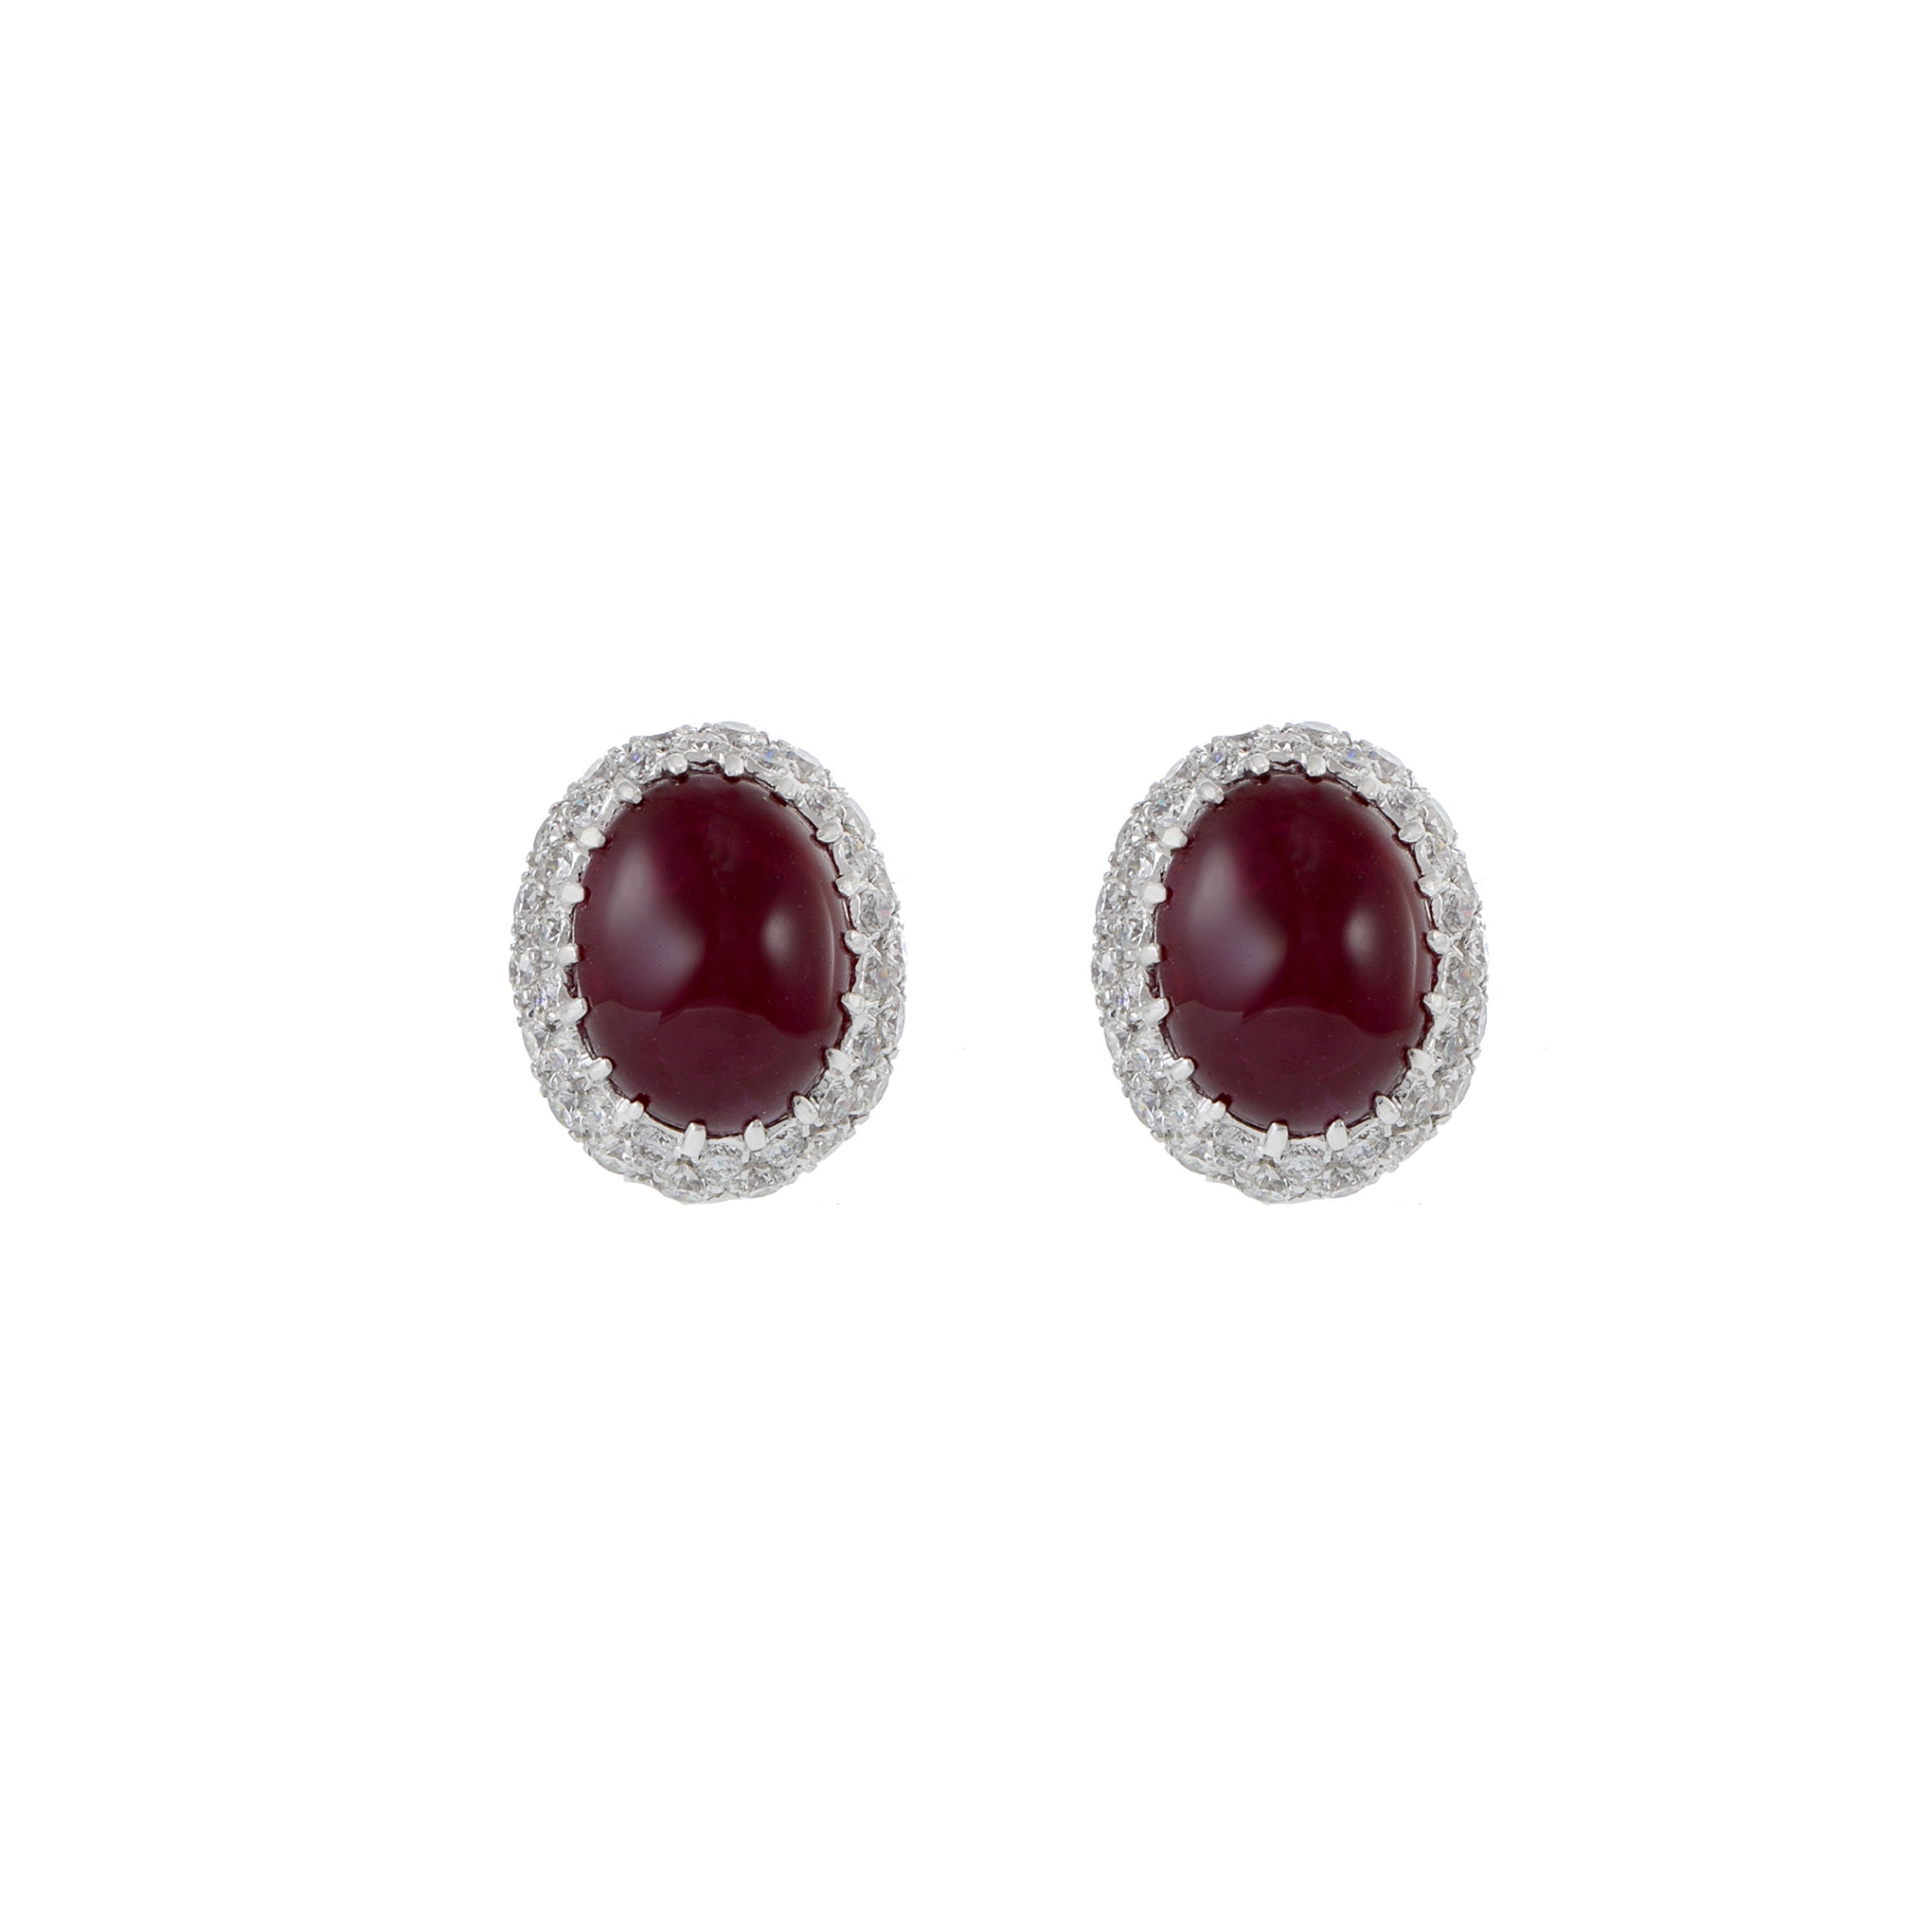 18KT White Gold Cabochon Burmese Ruby And Diamond Earrings